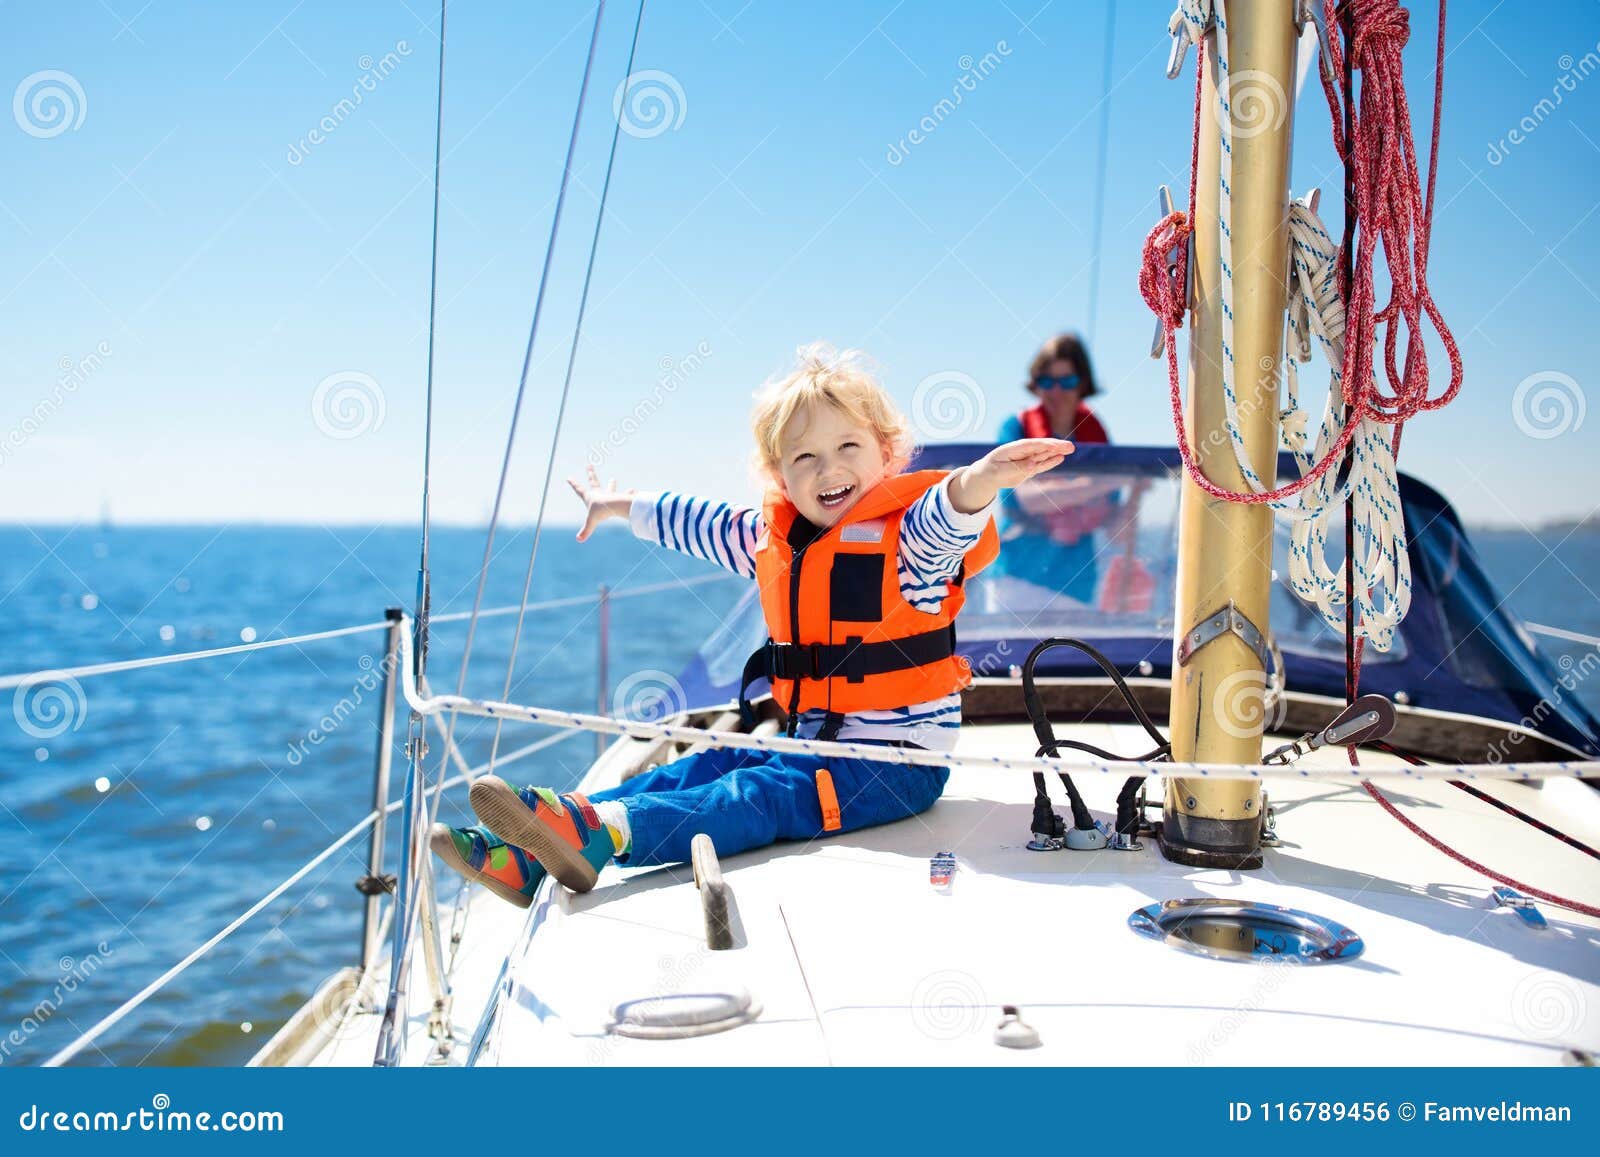 kids sail on yacht in sea. child sailing on boat.